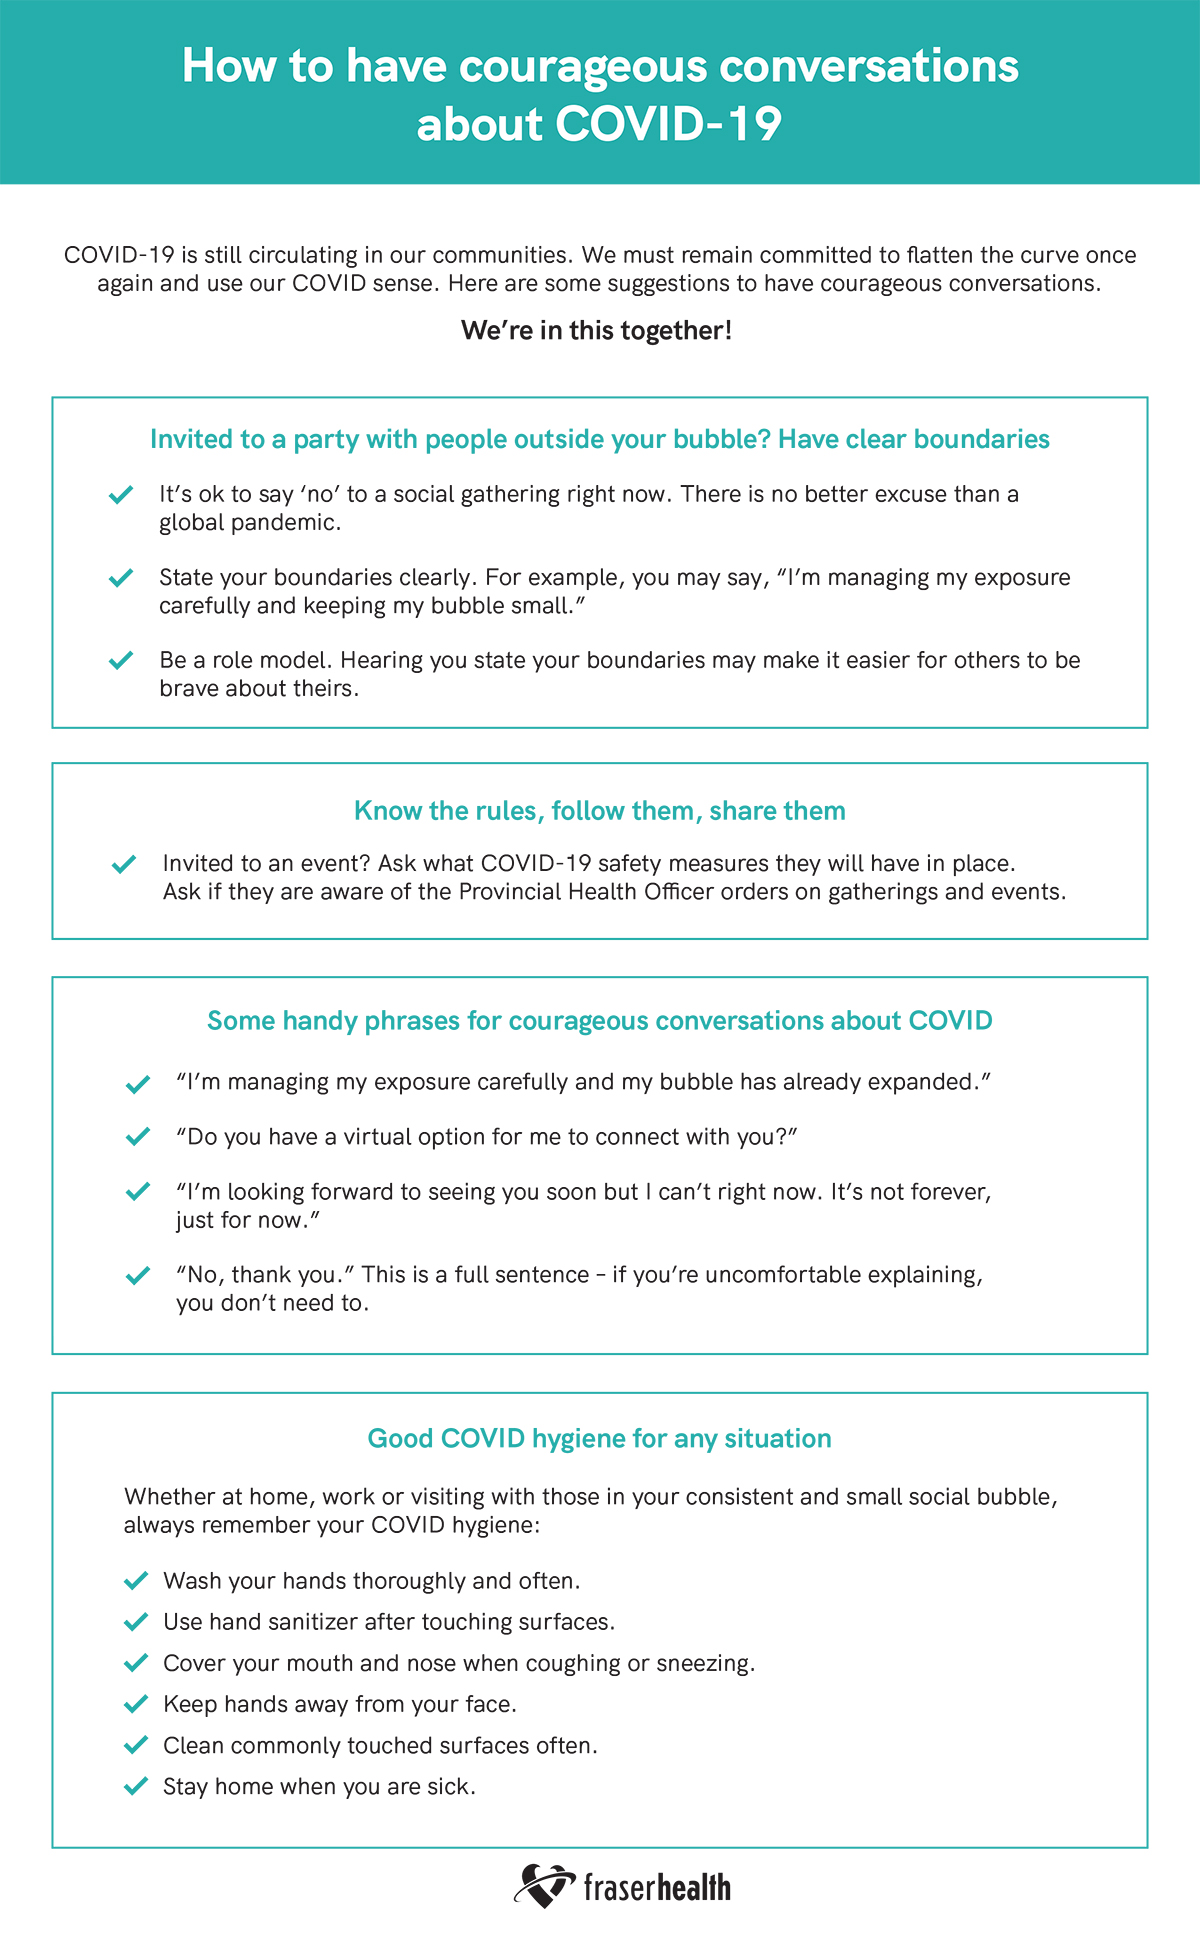 infographic on how to have courageous COVID-19 conversations